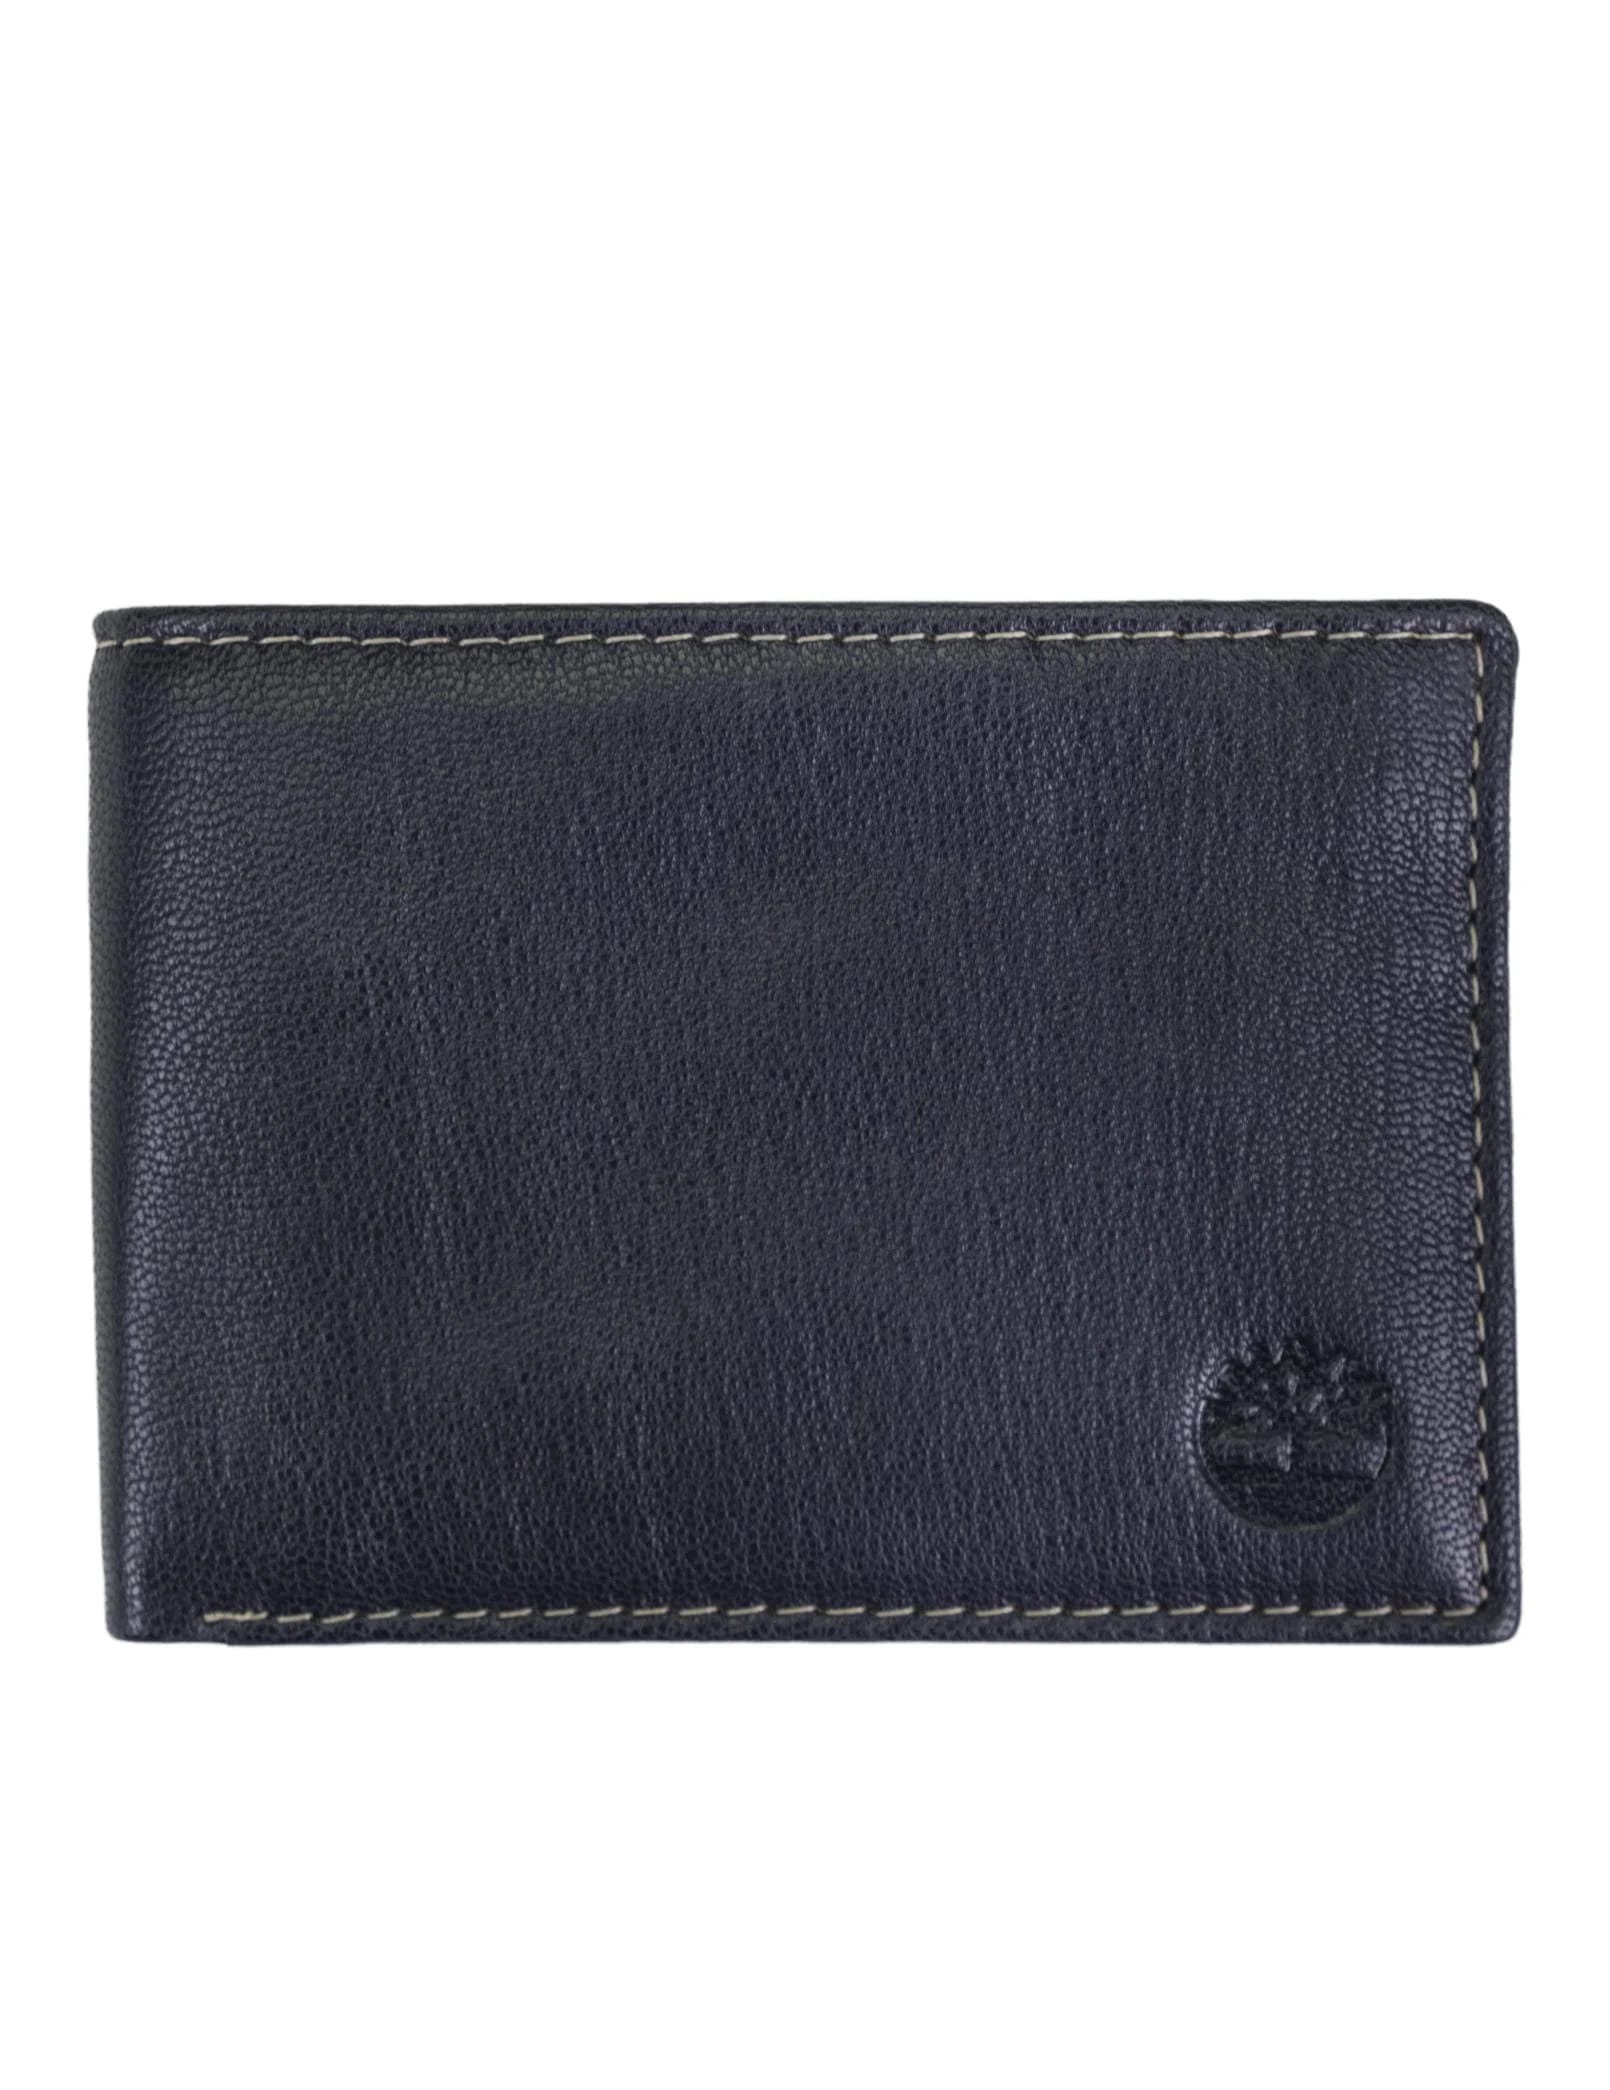 Rfid Blocking Leather Wallet for Credit Card Protection | Image